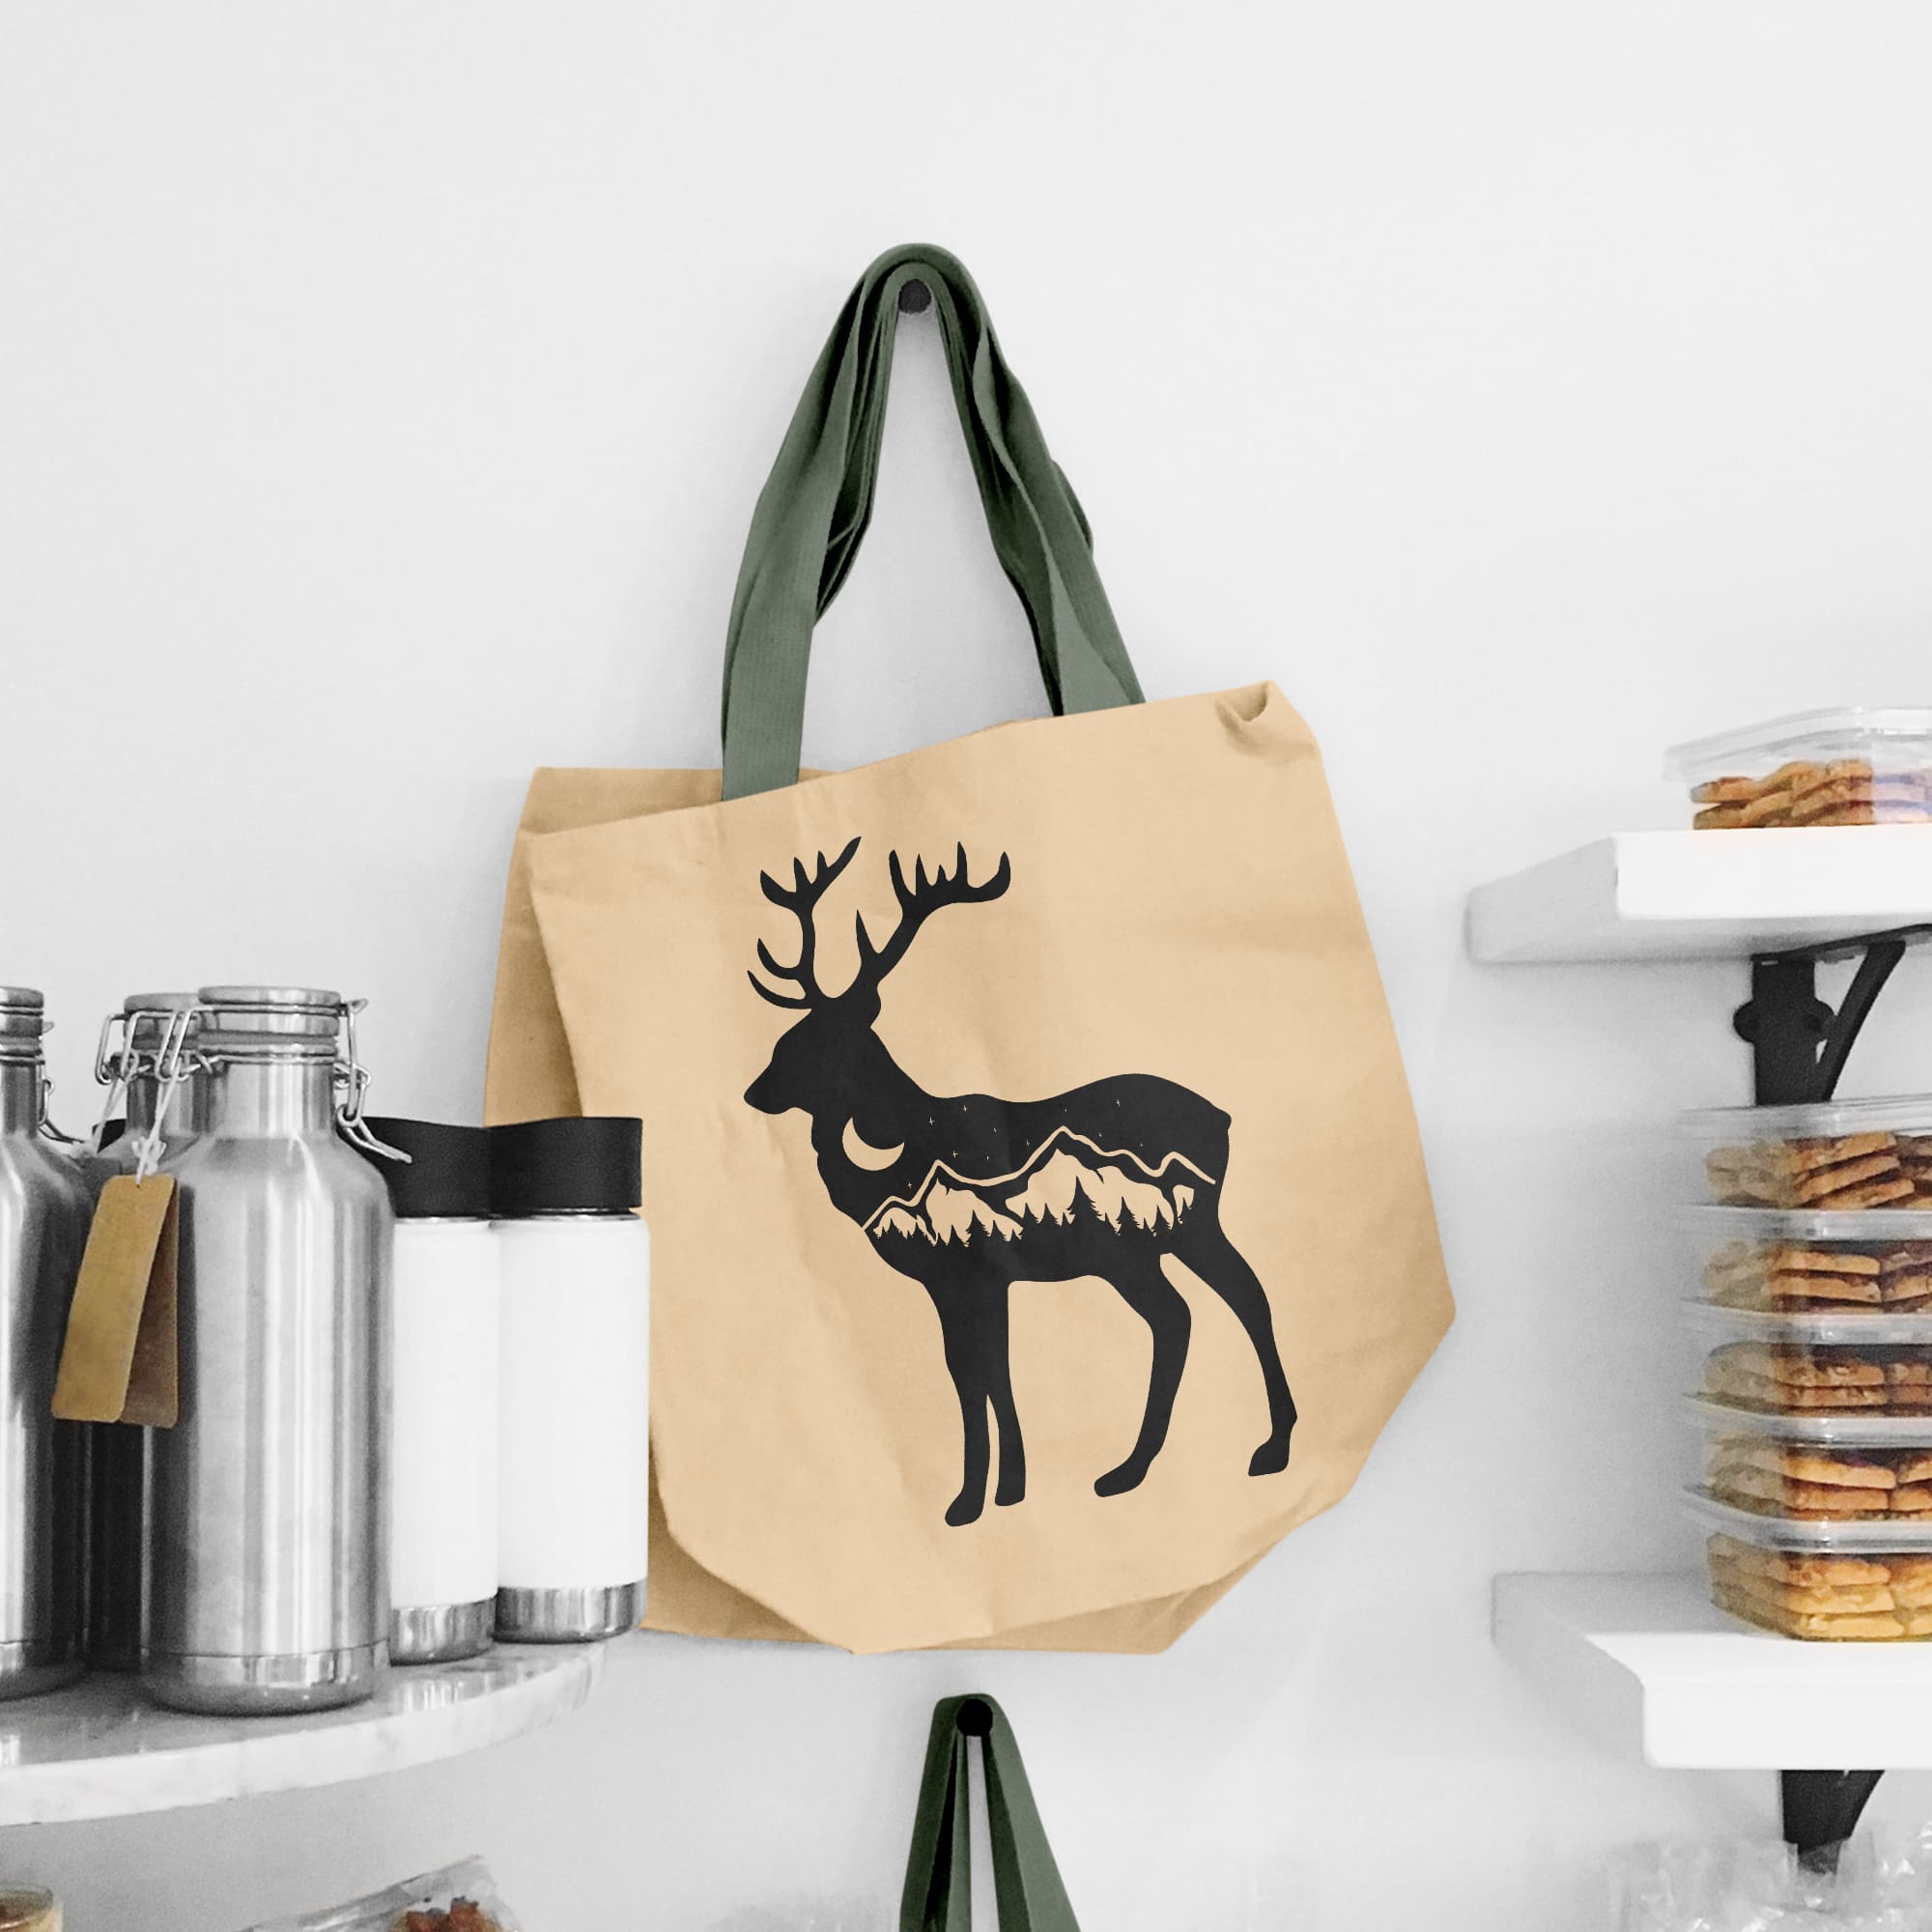 Bag with a deer on it hanging on a wall.